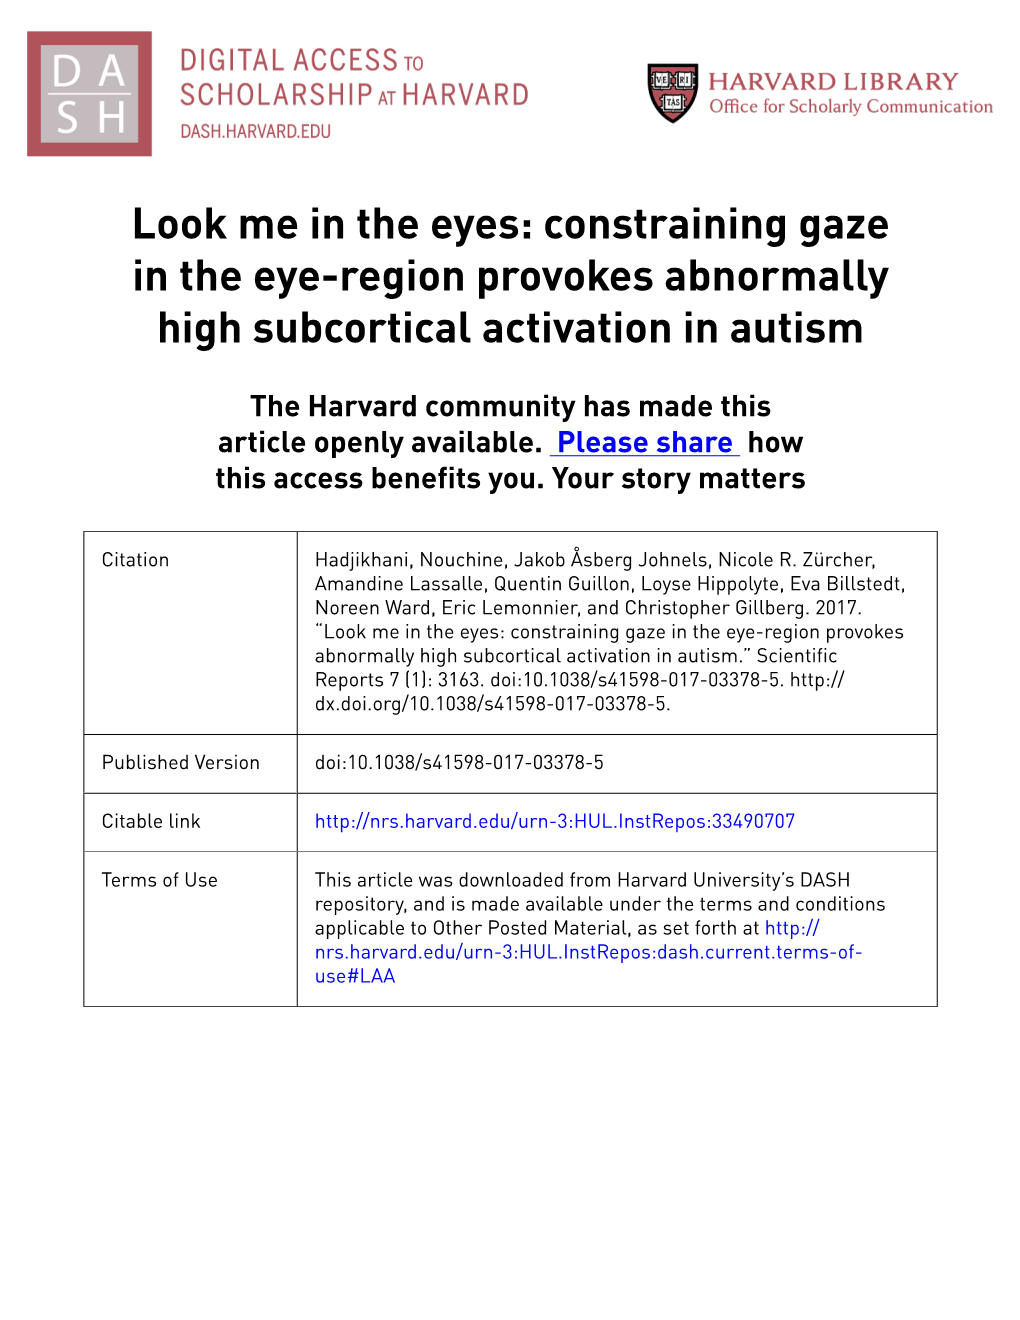 Constraining Gaze in the Eye-Region Provokes Abnormally High Subcortical Activation in Autism